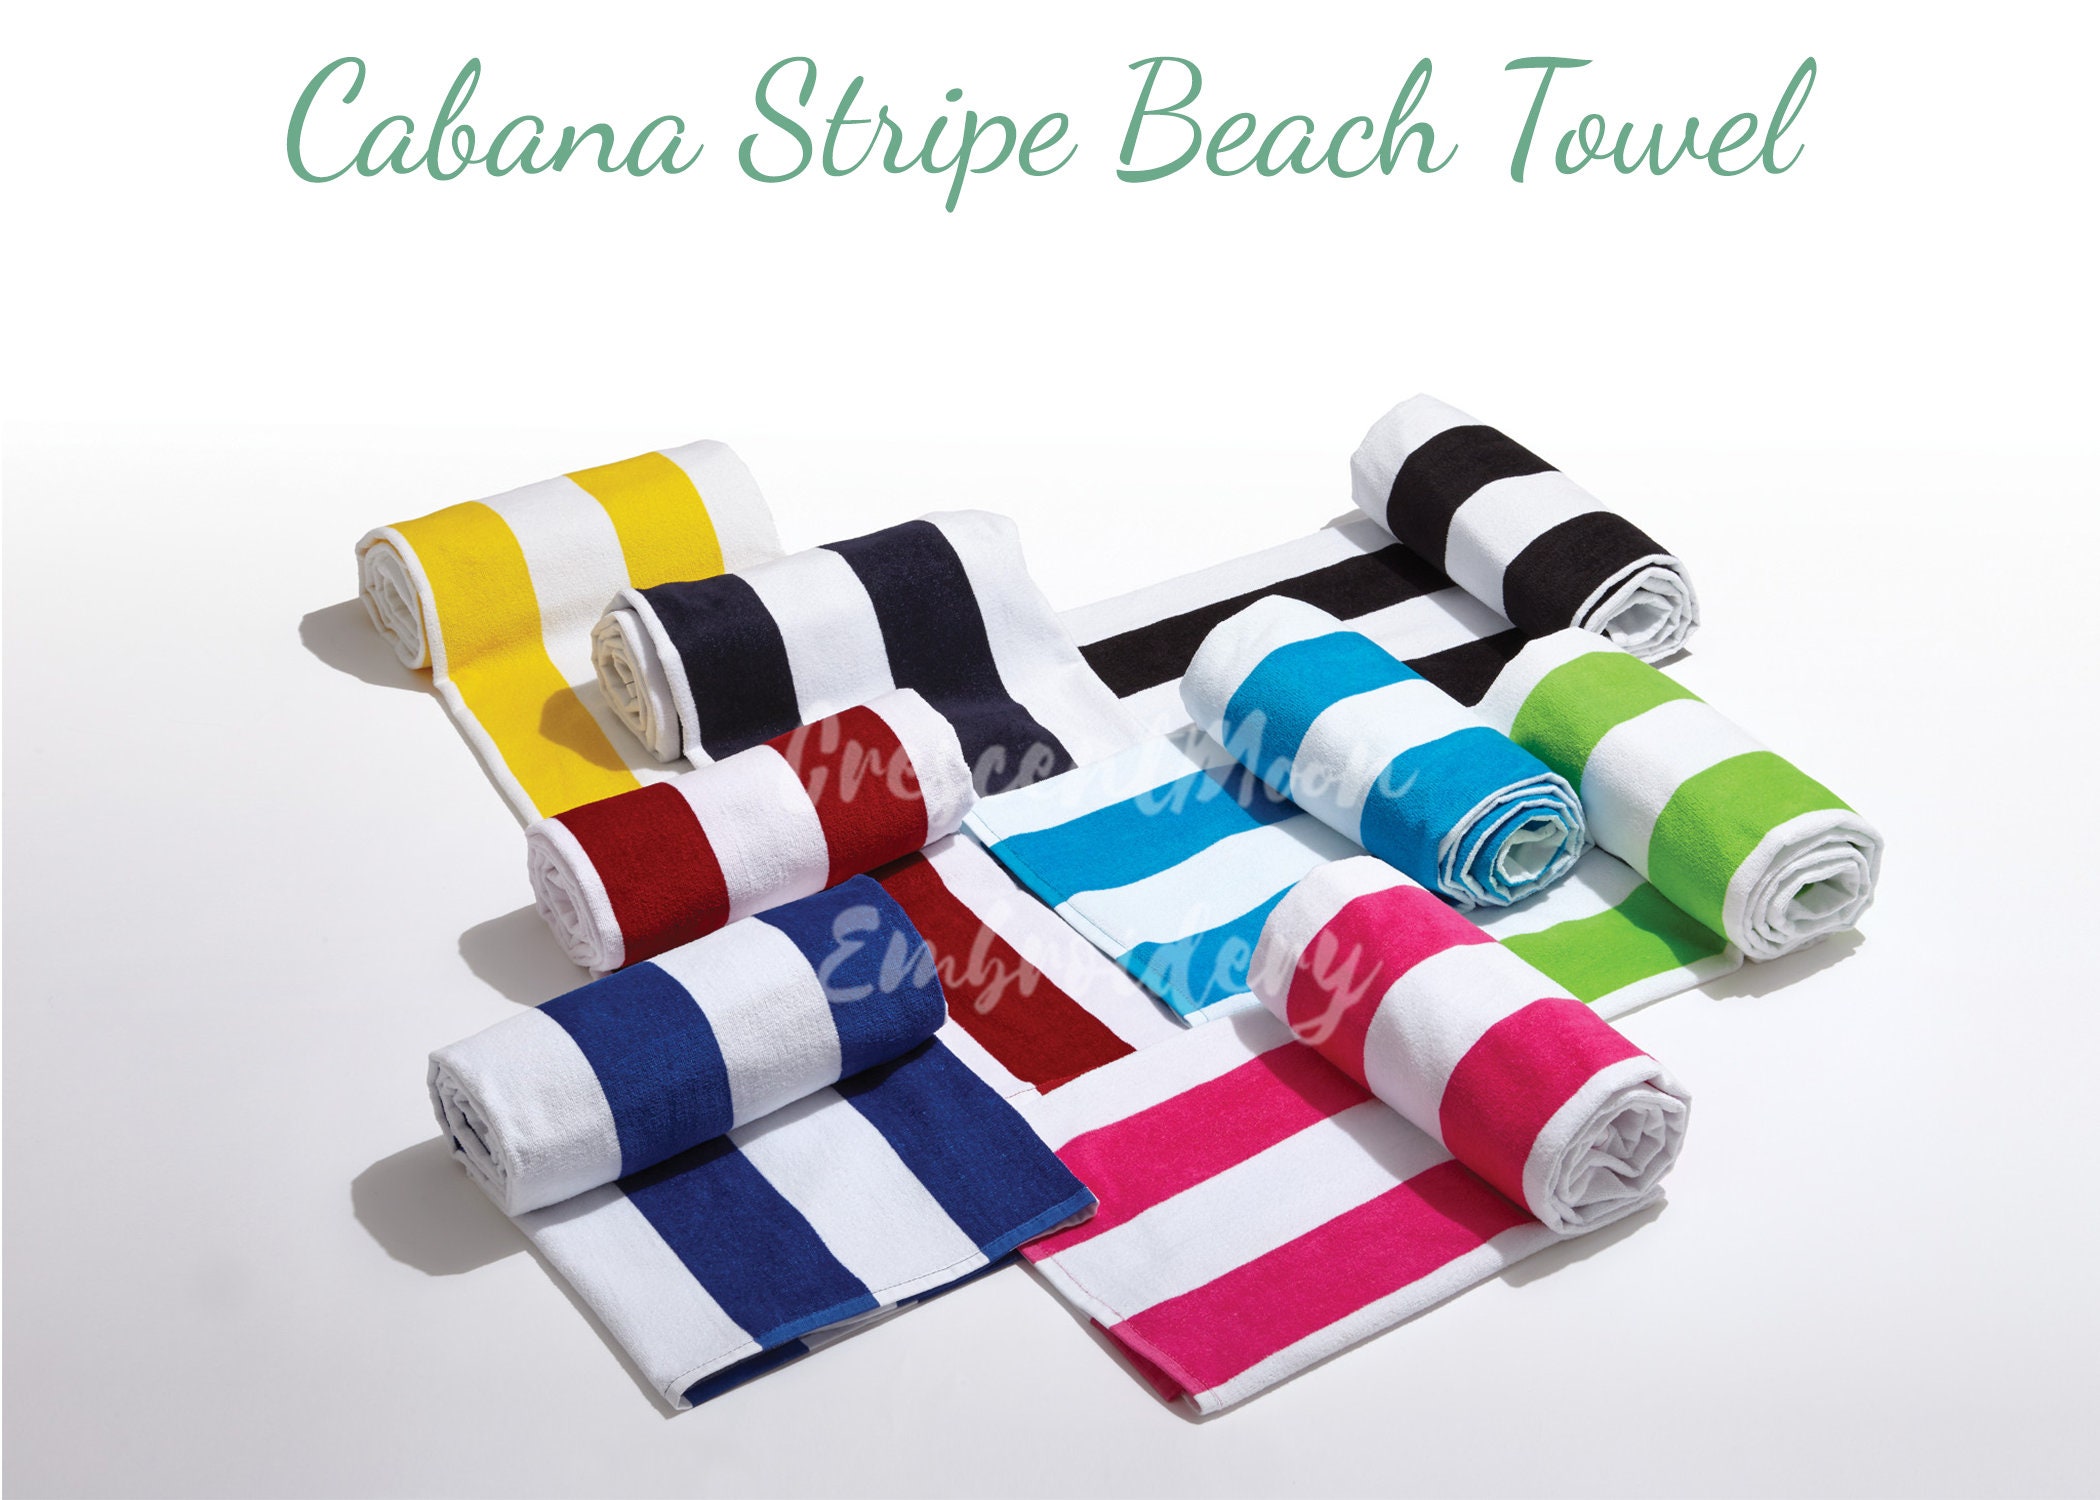 Personalized Cabana Stripe Beach Towel - Monogrammed Initials - Custom Large Pool Embroidered Name Logo Or Text